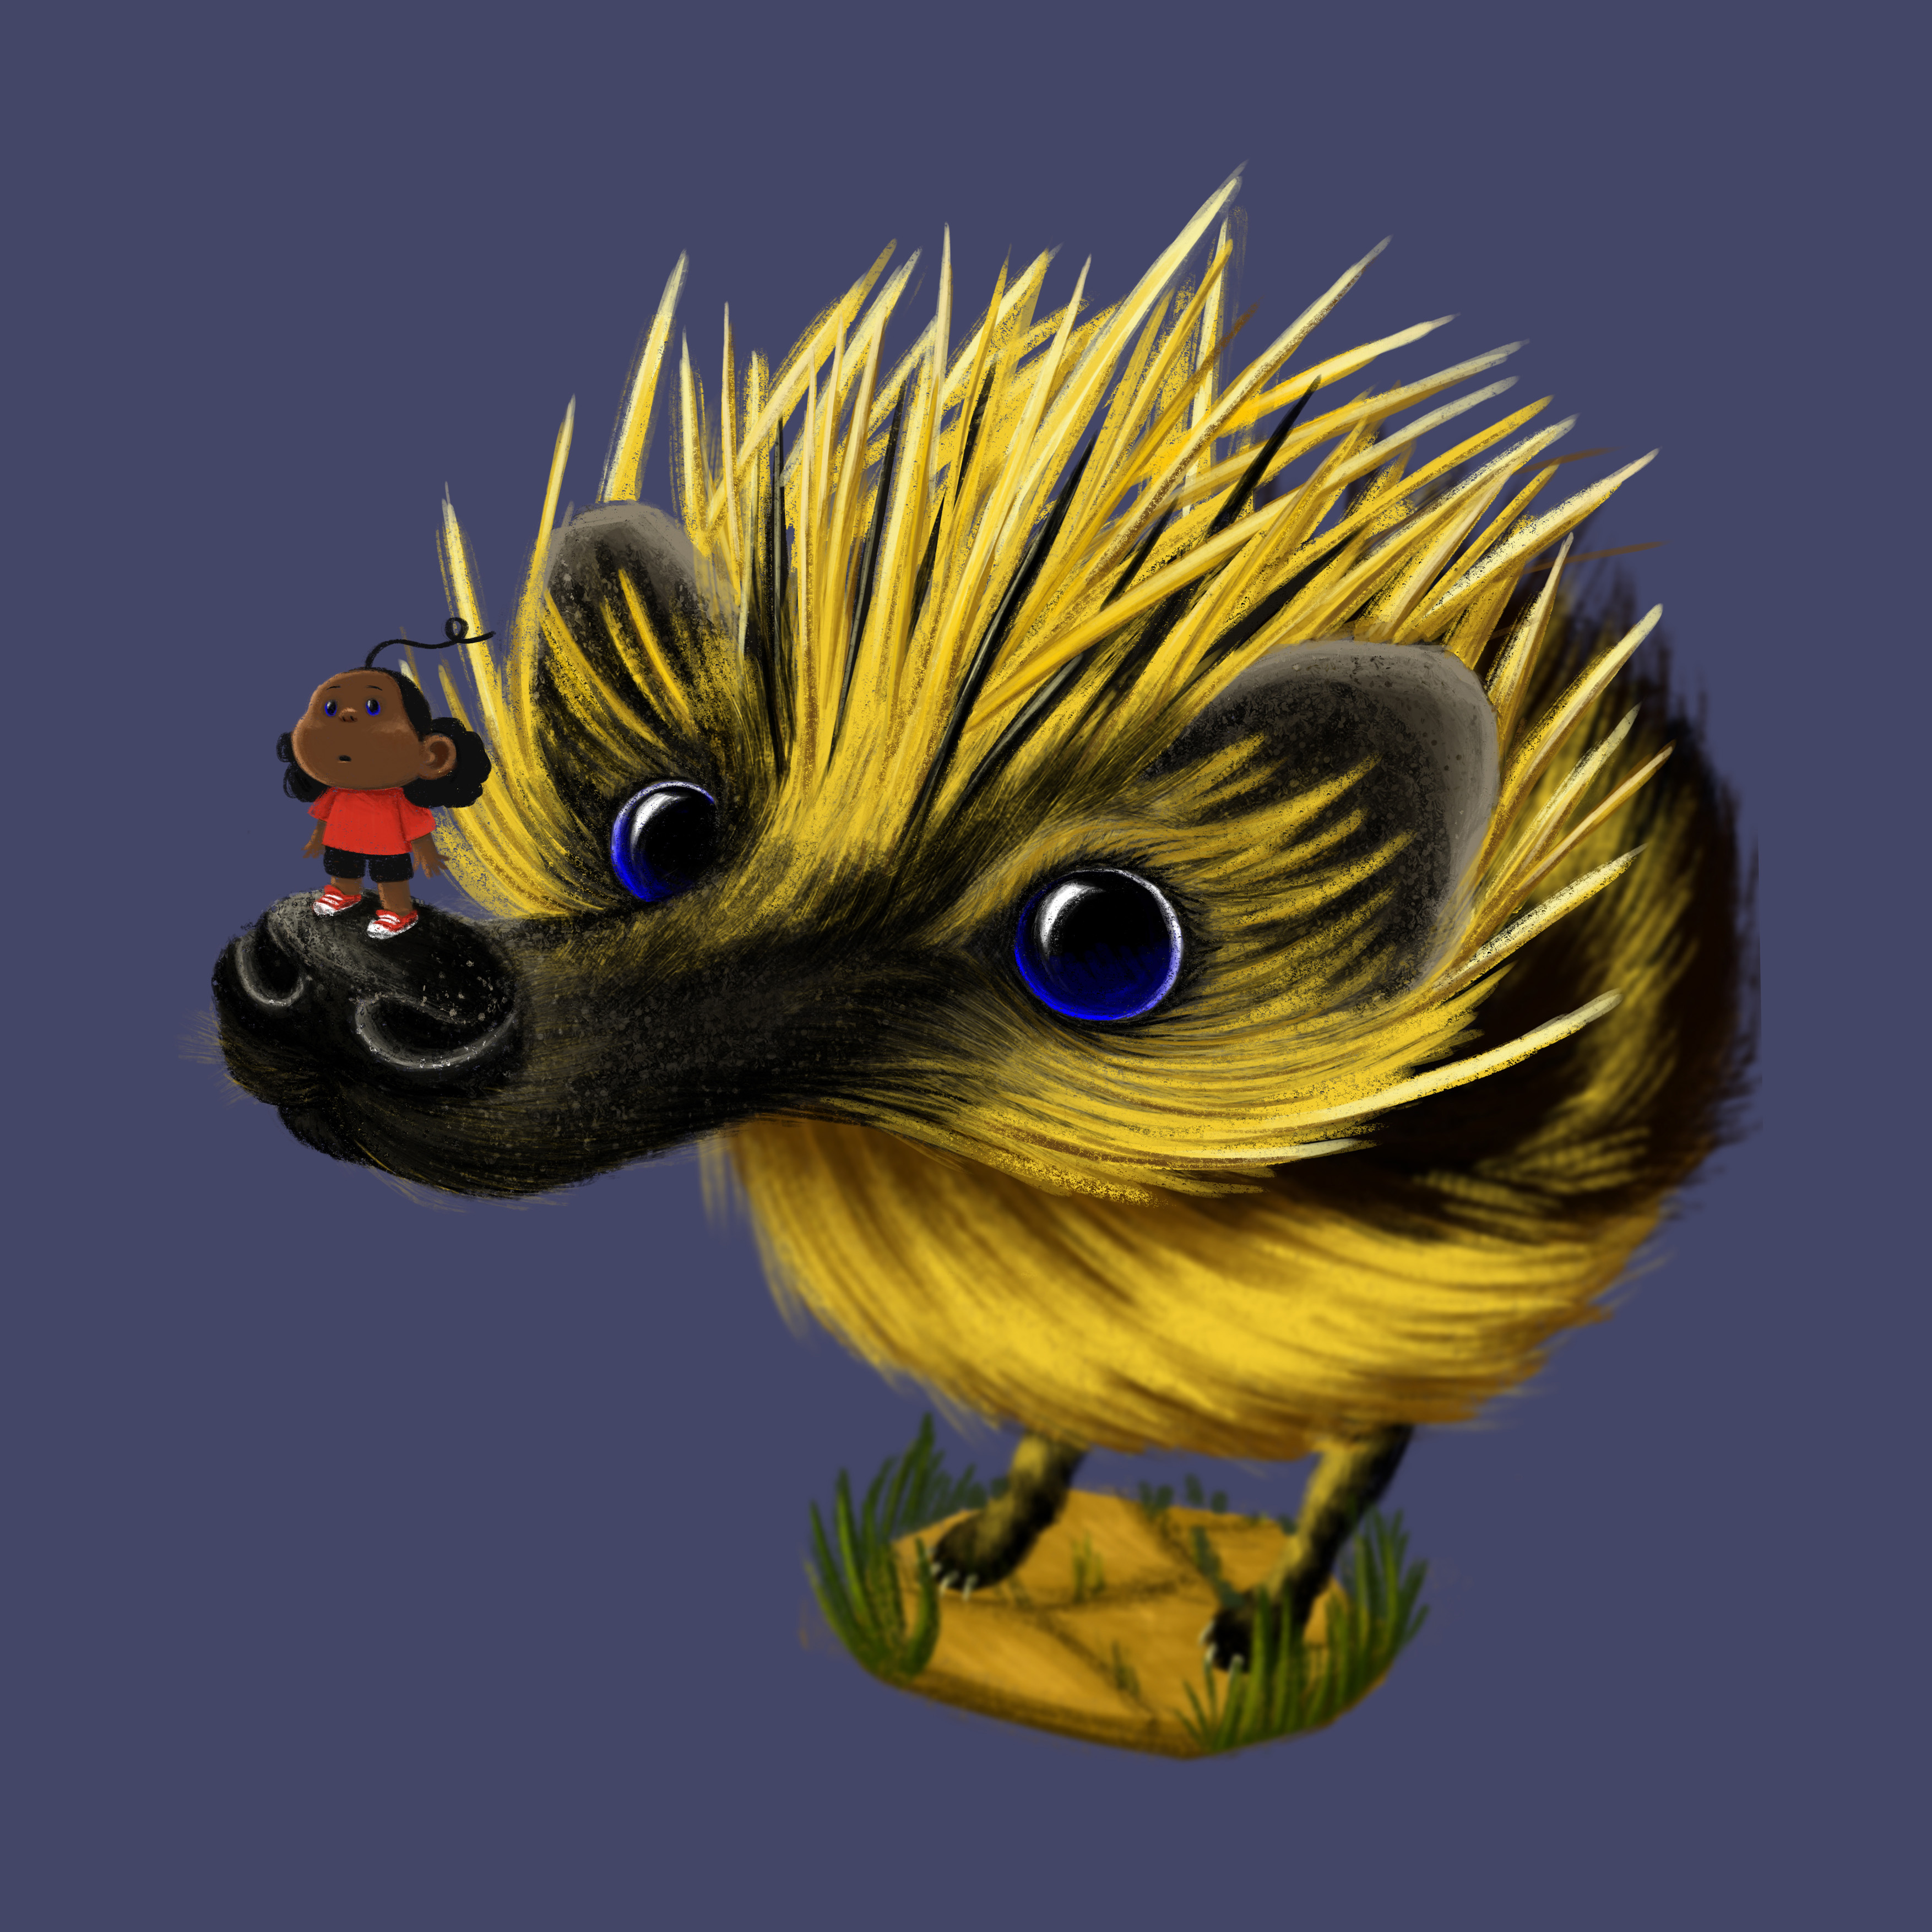 BA animation work by Amber Iles showing a bumble bee hedgehog character design.